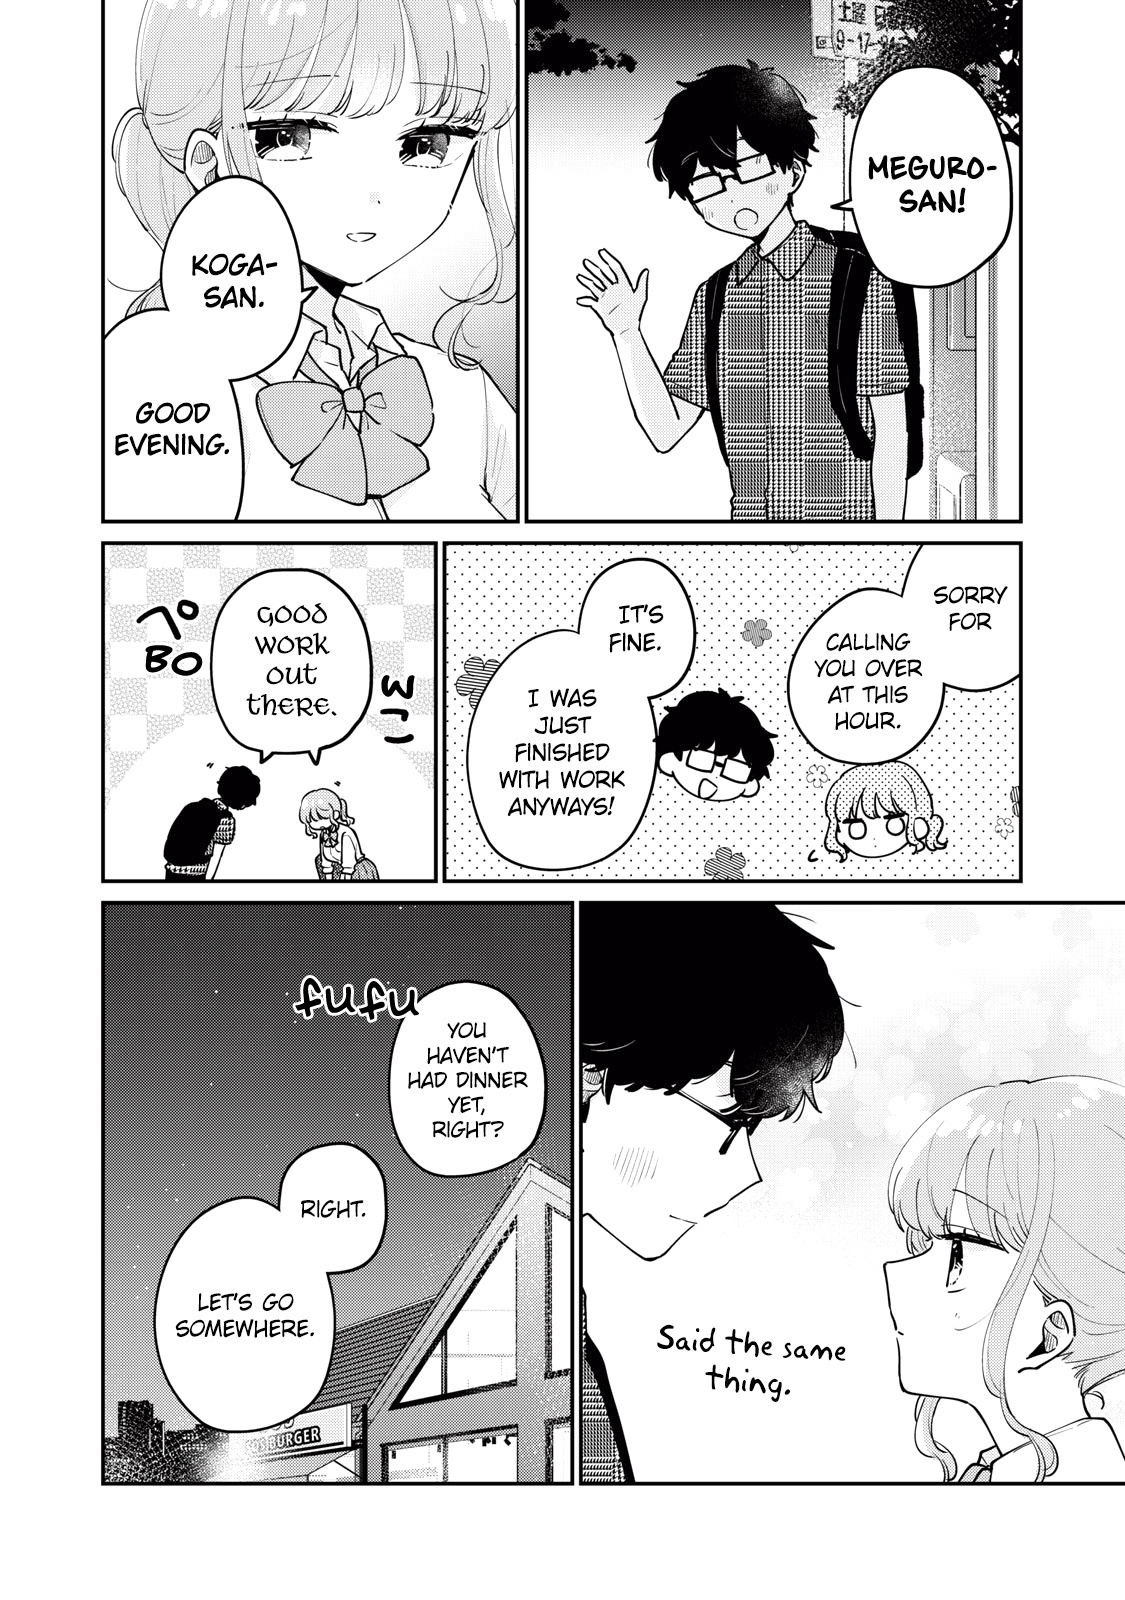 It's Not Meguro-San's First Time Vol.10 Chapter 72: Looking At It Together - Picture 3